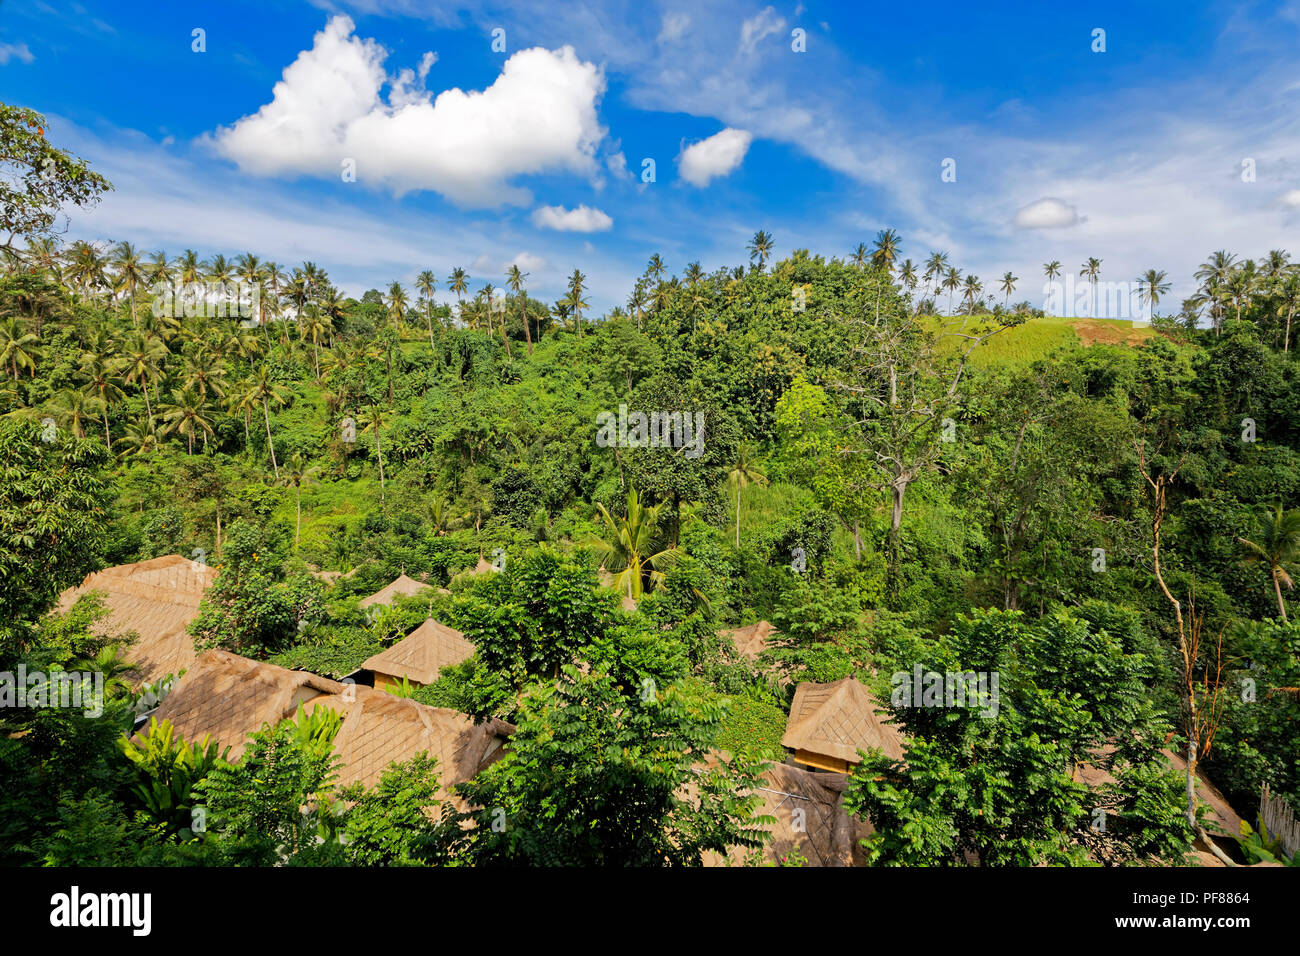 Resort Roofs in the Sayan River Valley, Ubud, Bali Stock Photo